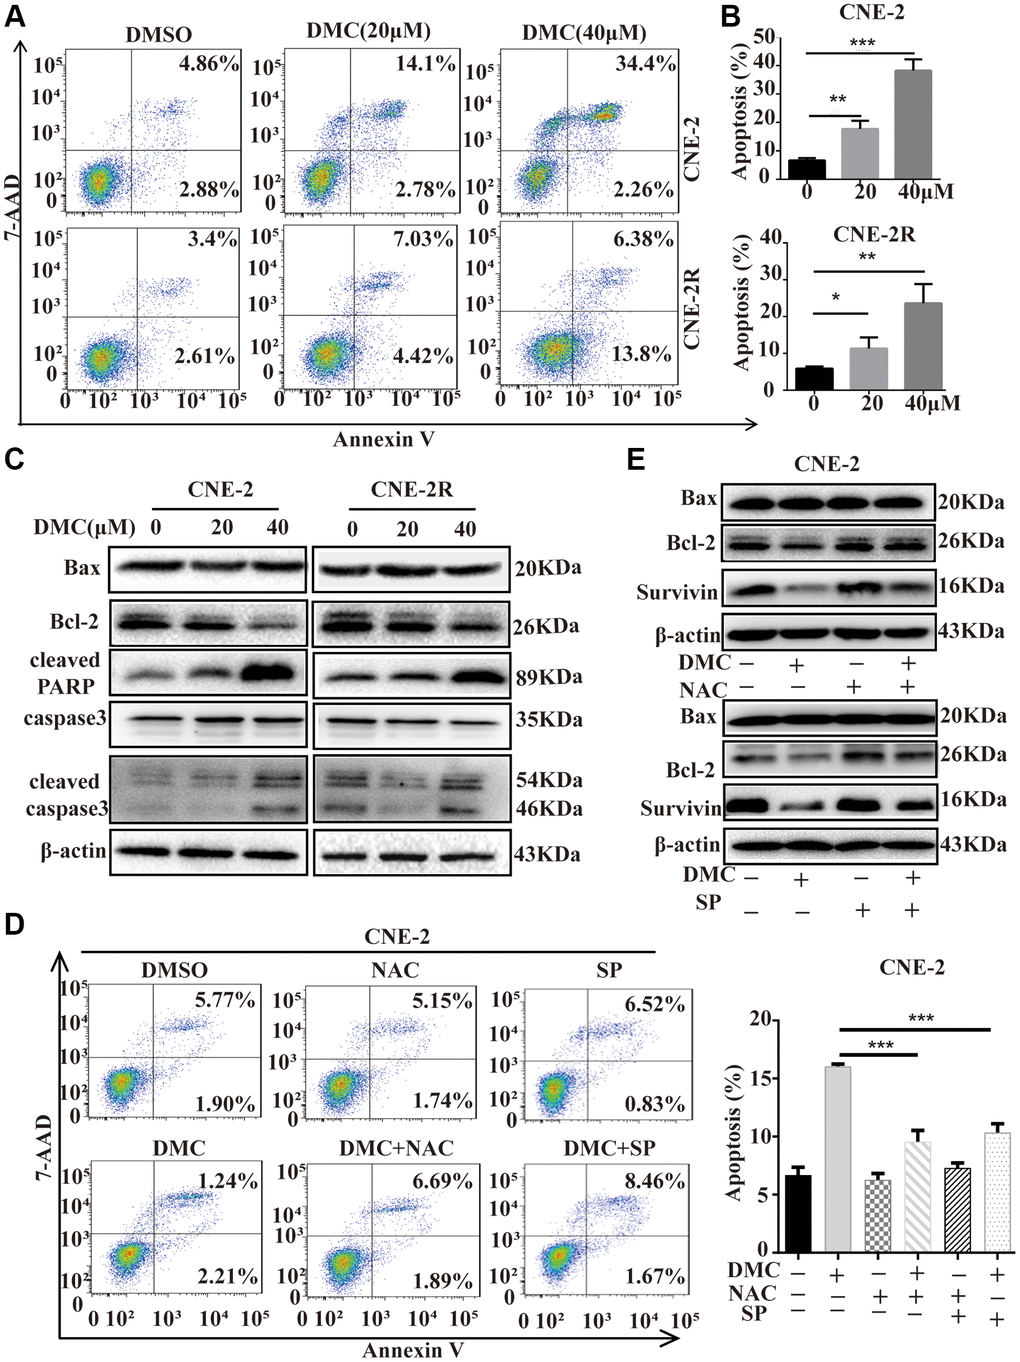 DMC induced apoptosis and autophagic death in NPC cells. (A) CNE-2 and CNE-2R cells were treated with 0.1% DMSO or DMC (20 and 40 μM) for 48 h, and then apoptotic cells were detected with the annexin V-PE/7-AAD kit and analysed by flow cytometry. (B) Statistical analysis histogram of apoptotic cells ratio. (C) Cells were treated with DMC 0.1% DMSO or DMC (20 and 40 μM) for 48 h, and the expression levels of apoptosis-related proteins (cleaved-PARP, cleaved-caspase-3, caspase-3, Bax, and Bcl-2) were tested in cells by Western blotting. β-actin was used as a normalization control. (D) CNE-2 cells were treated with 0.1% DMSO or 20 μM DMC for 24 h in the absence or presence of NAC (5 mM) pretreatment for 1h or SP600125 (30 μM) pretreatment for 1 h, and then apoptotic cells were detected by flow cytometry. Statistical analysis histogram of apoptotic cells ratio. (E) The expression levels of Bax, Bcl-2 and Survivin were tested in CNE-2 cells as Figure 5D by Western blotting. **P ***P 